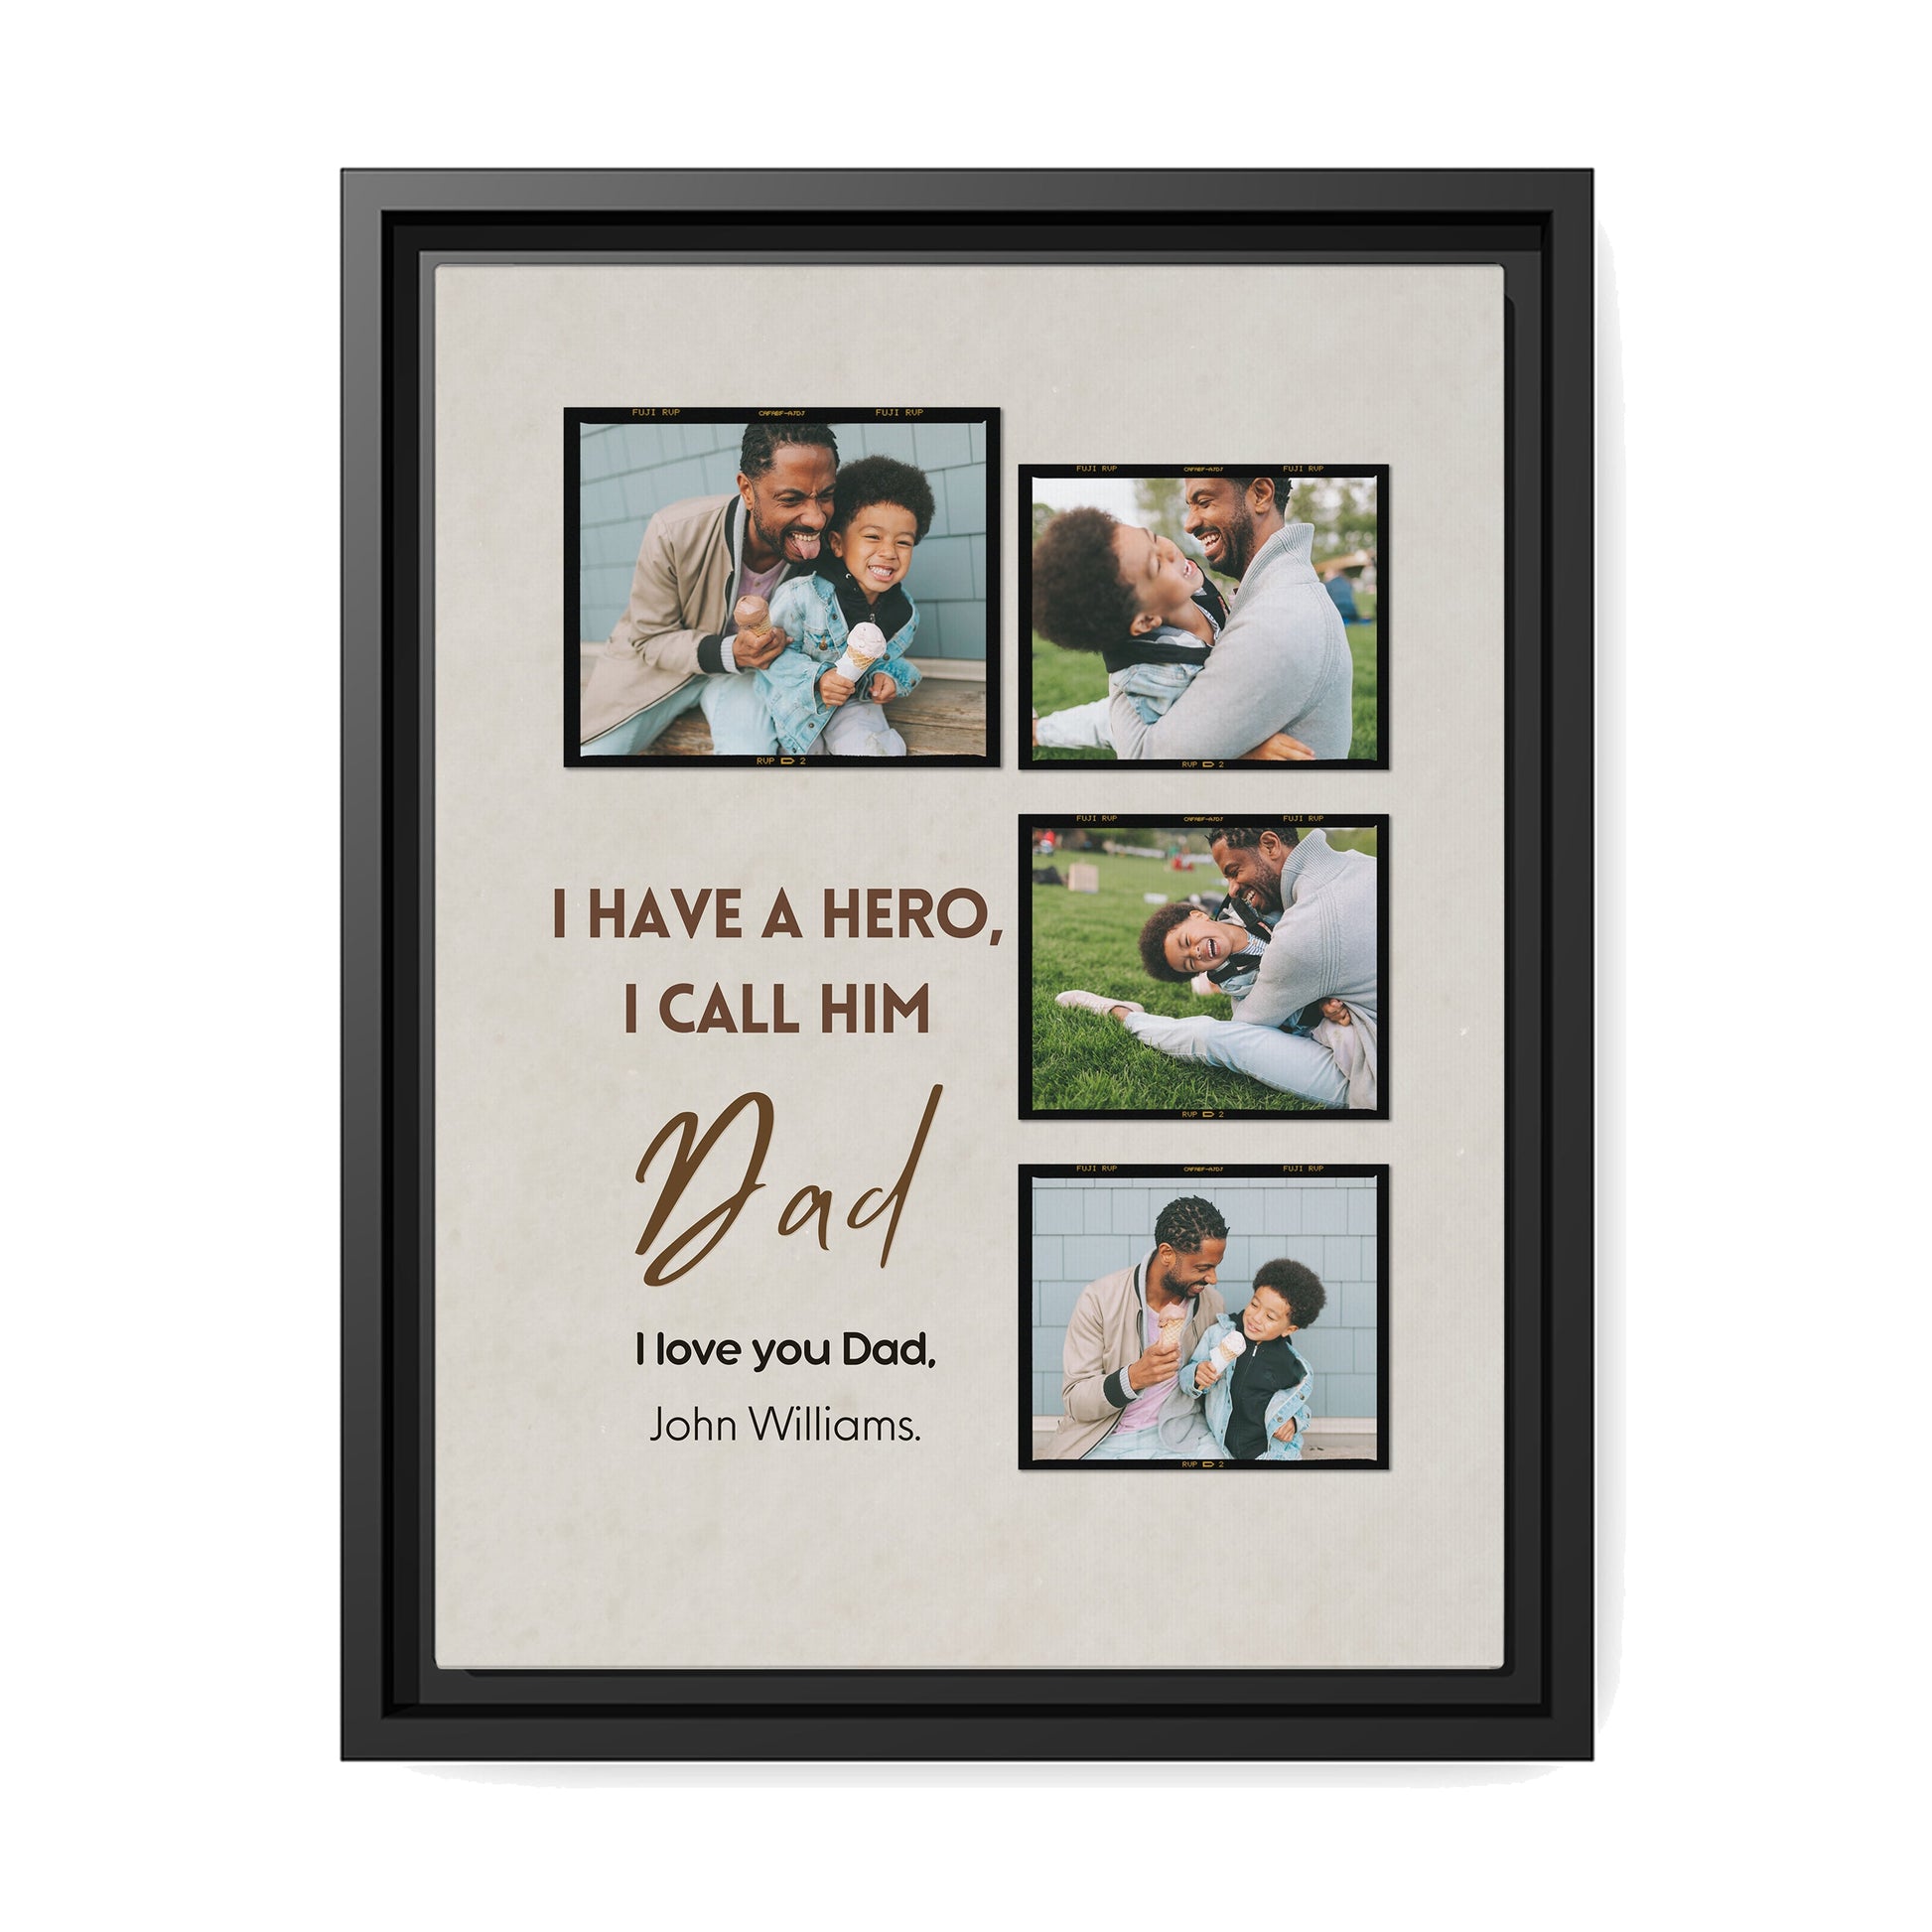 I have a hero - Personalized Father's Day or Birthday gift for Dad - Custom Canvas Print - MyMindfulGifts